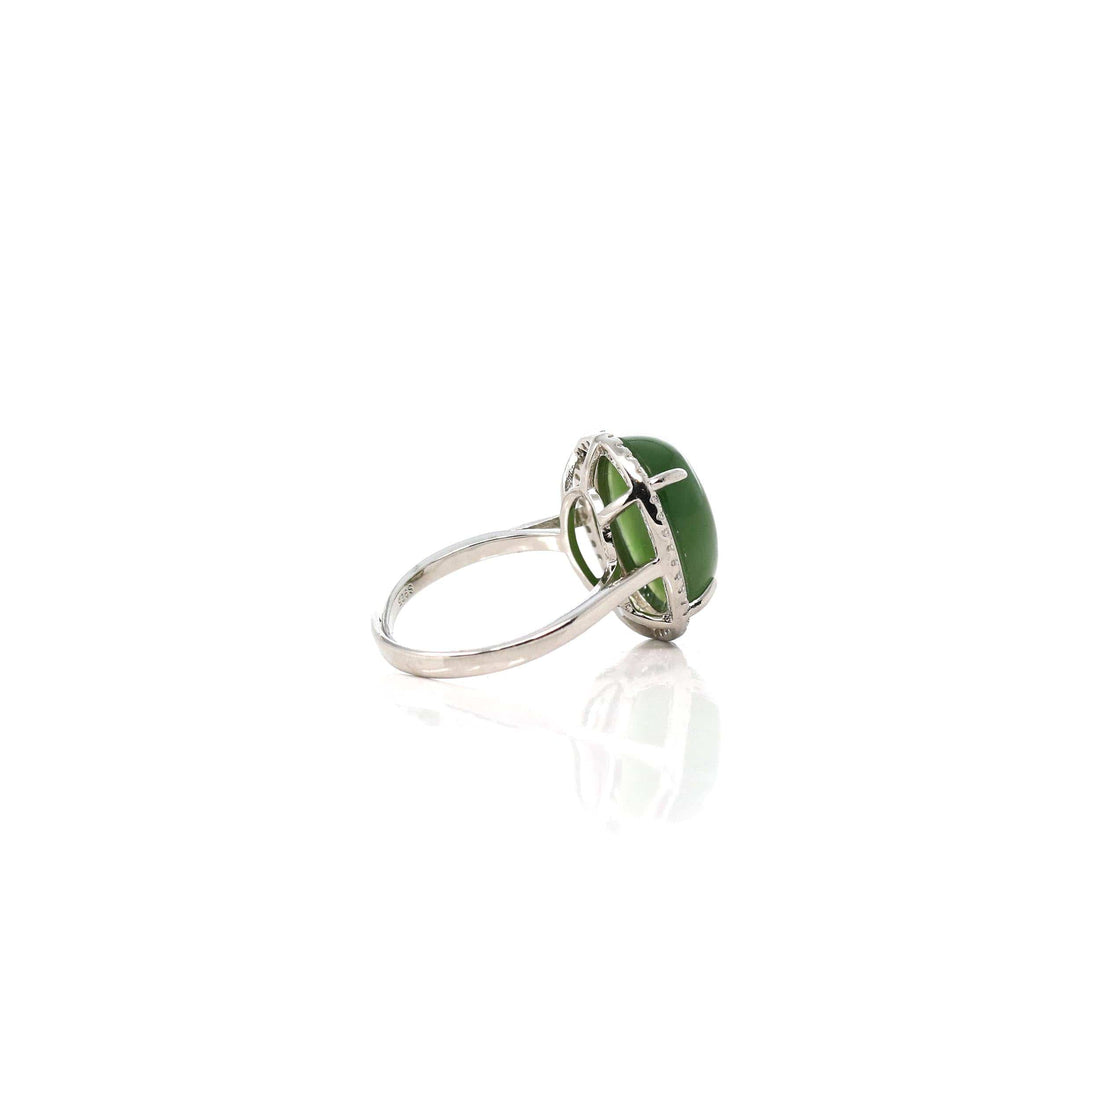 Baikalla Jewelry Jade Ring Copy of Baikalla™ "Classic Oval With Accents" Sterling Silver Real Green Nephrite Jade Classic Ring For Her